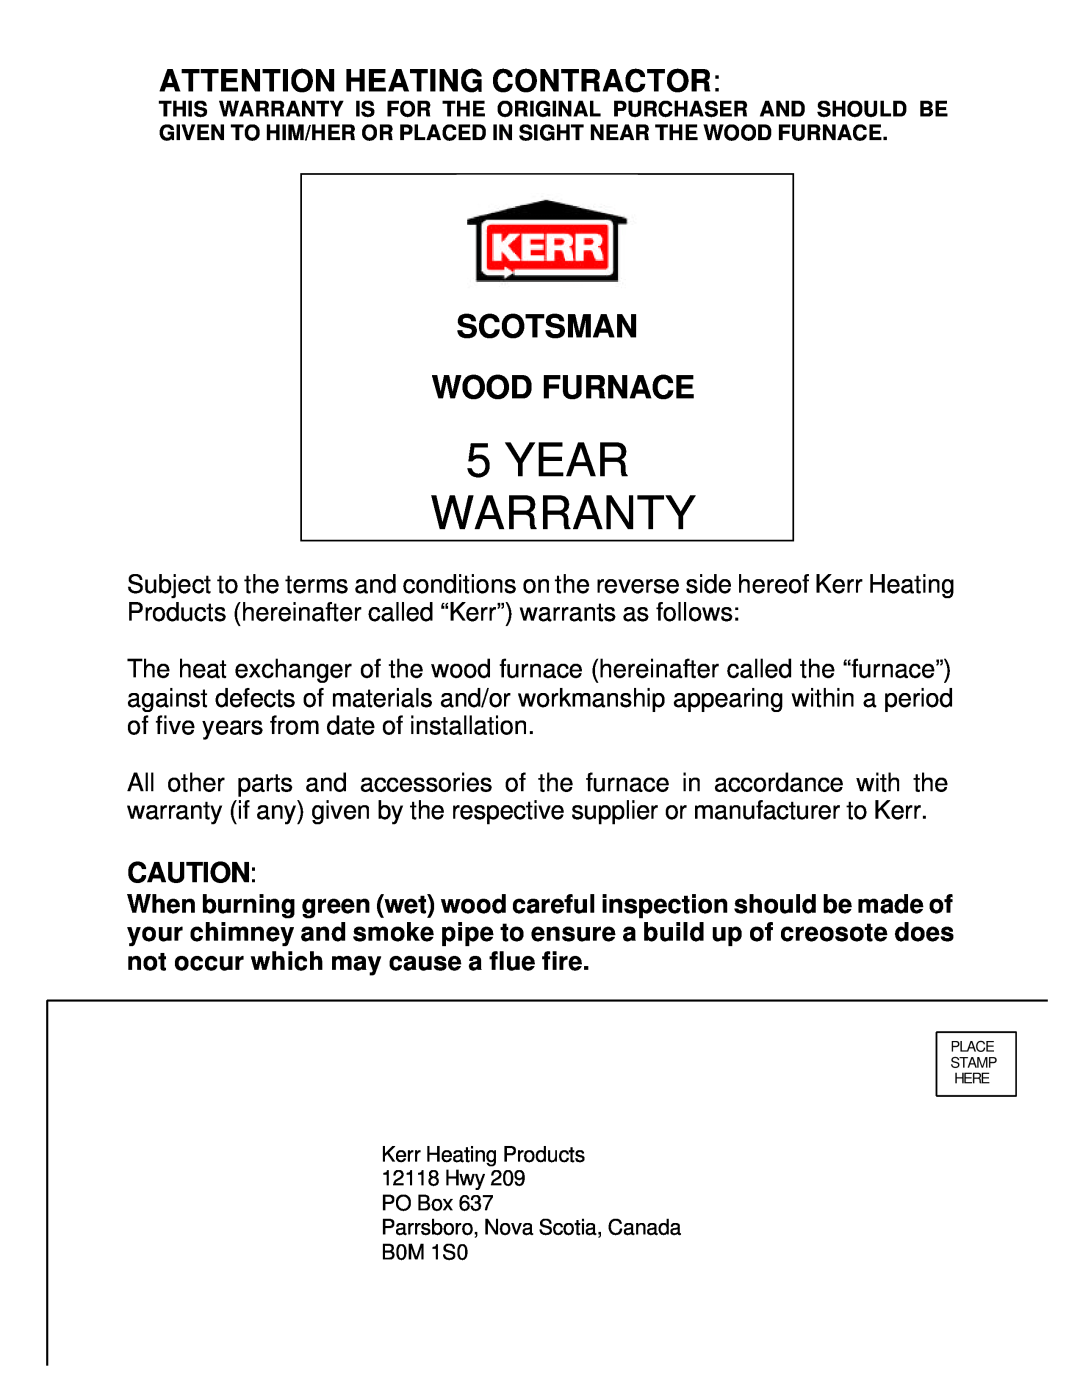 Scotsman Ice DB-101 owner manual Scotsman Wood Furnace, 5YEAR WARRANTY, Attention Heating Contractor 